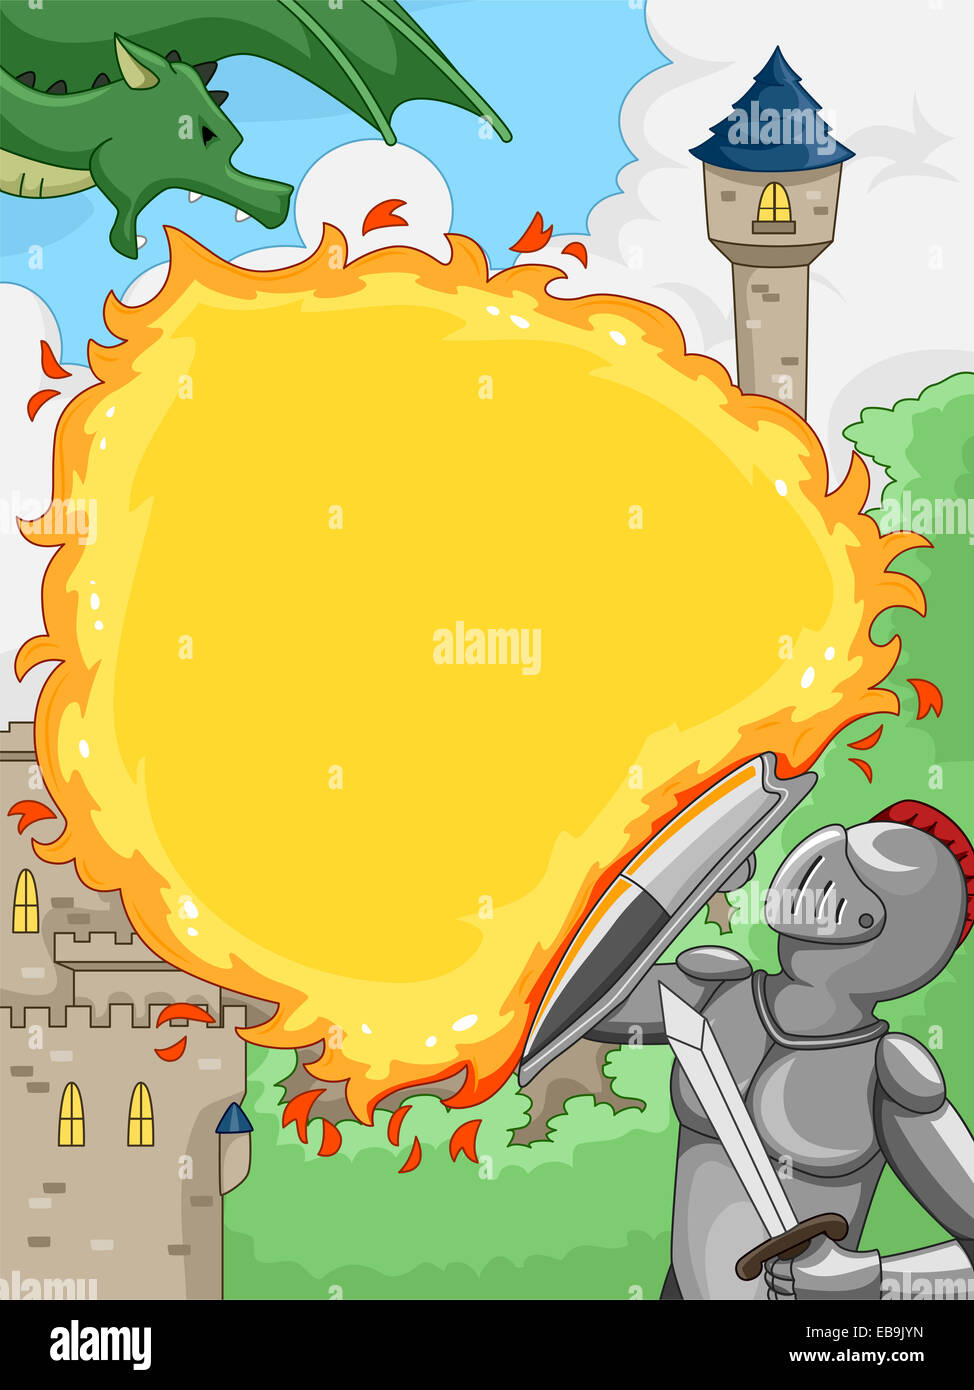 Illustration Featuring a Knight Shielding Himself Against a Dragon's Fiery Attack Stock Photo